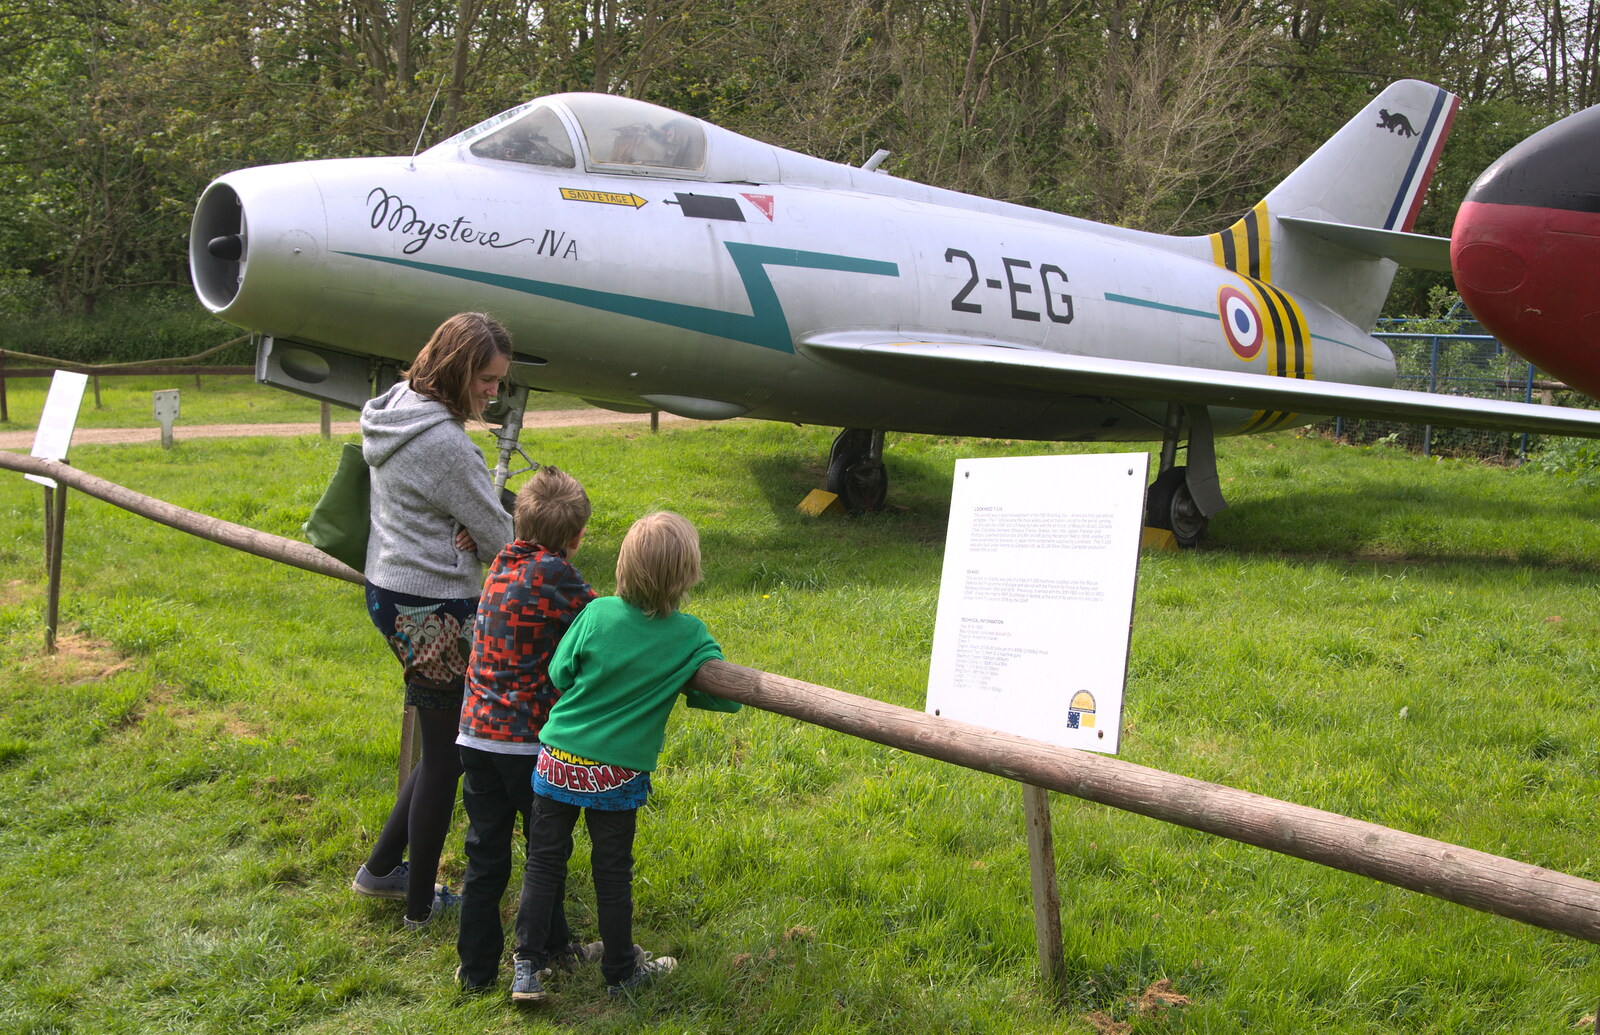 The gang ponder a French Mystere IVa from Norfolk and Suffolk Aviation Museum, Flixton, Suffolk - 30th April 2017